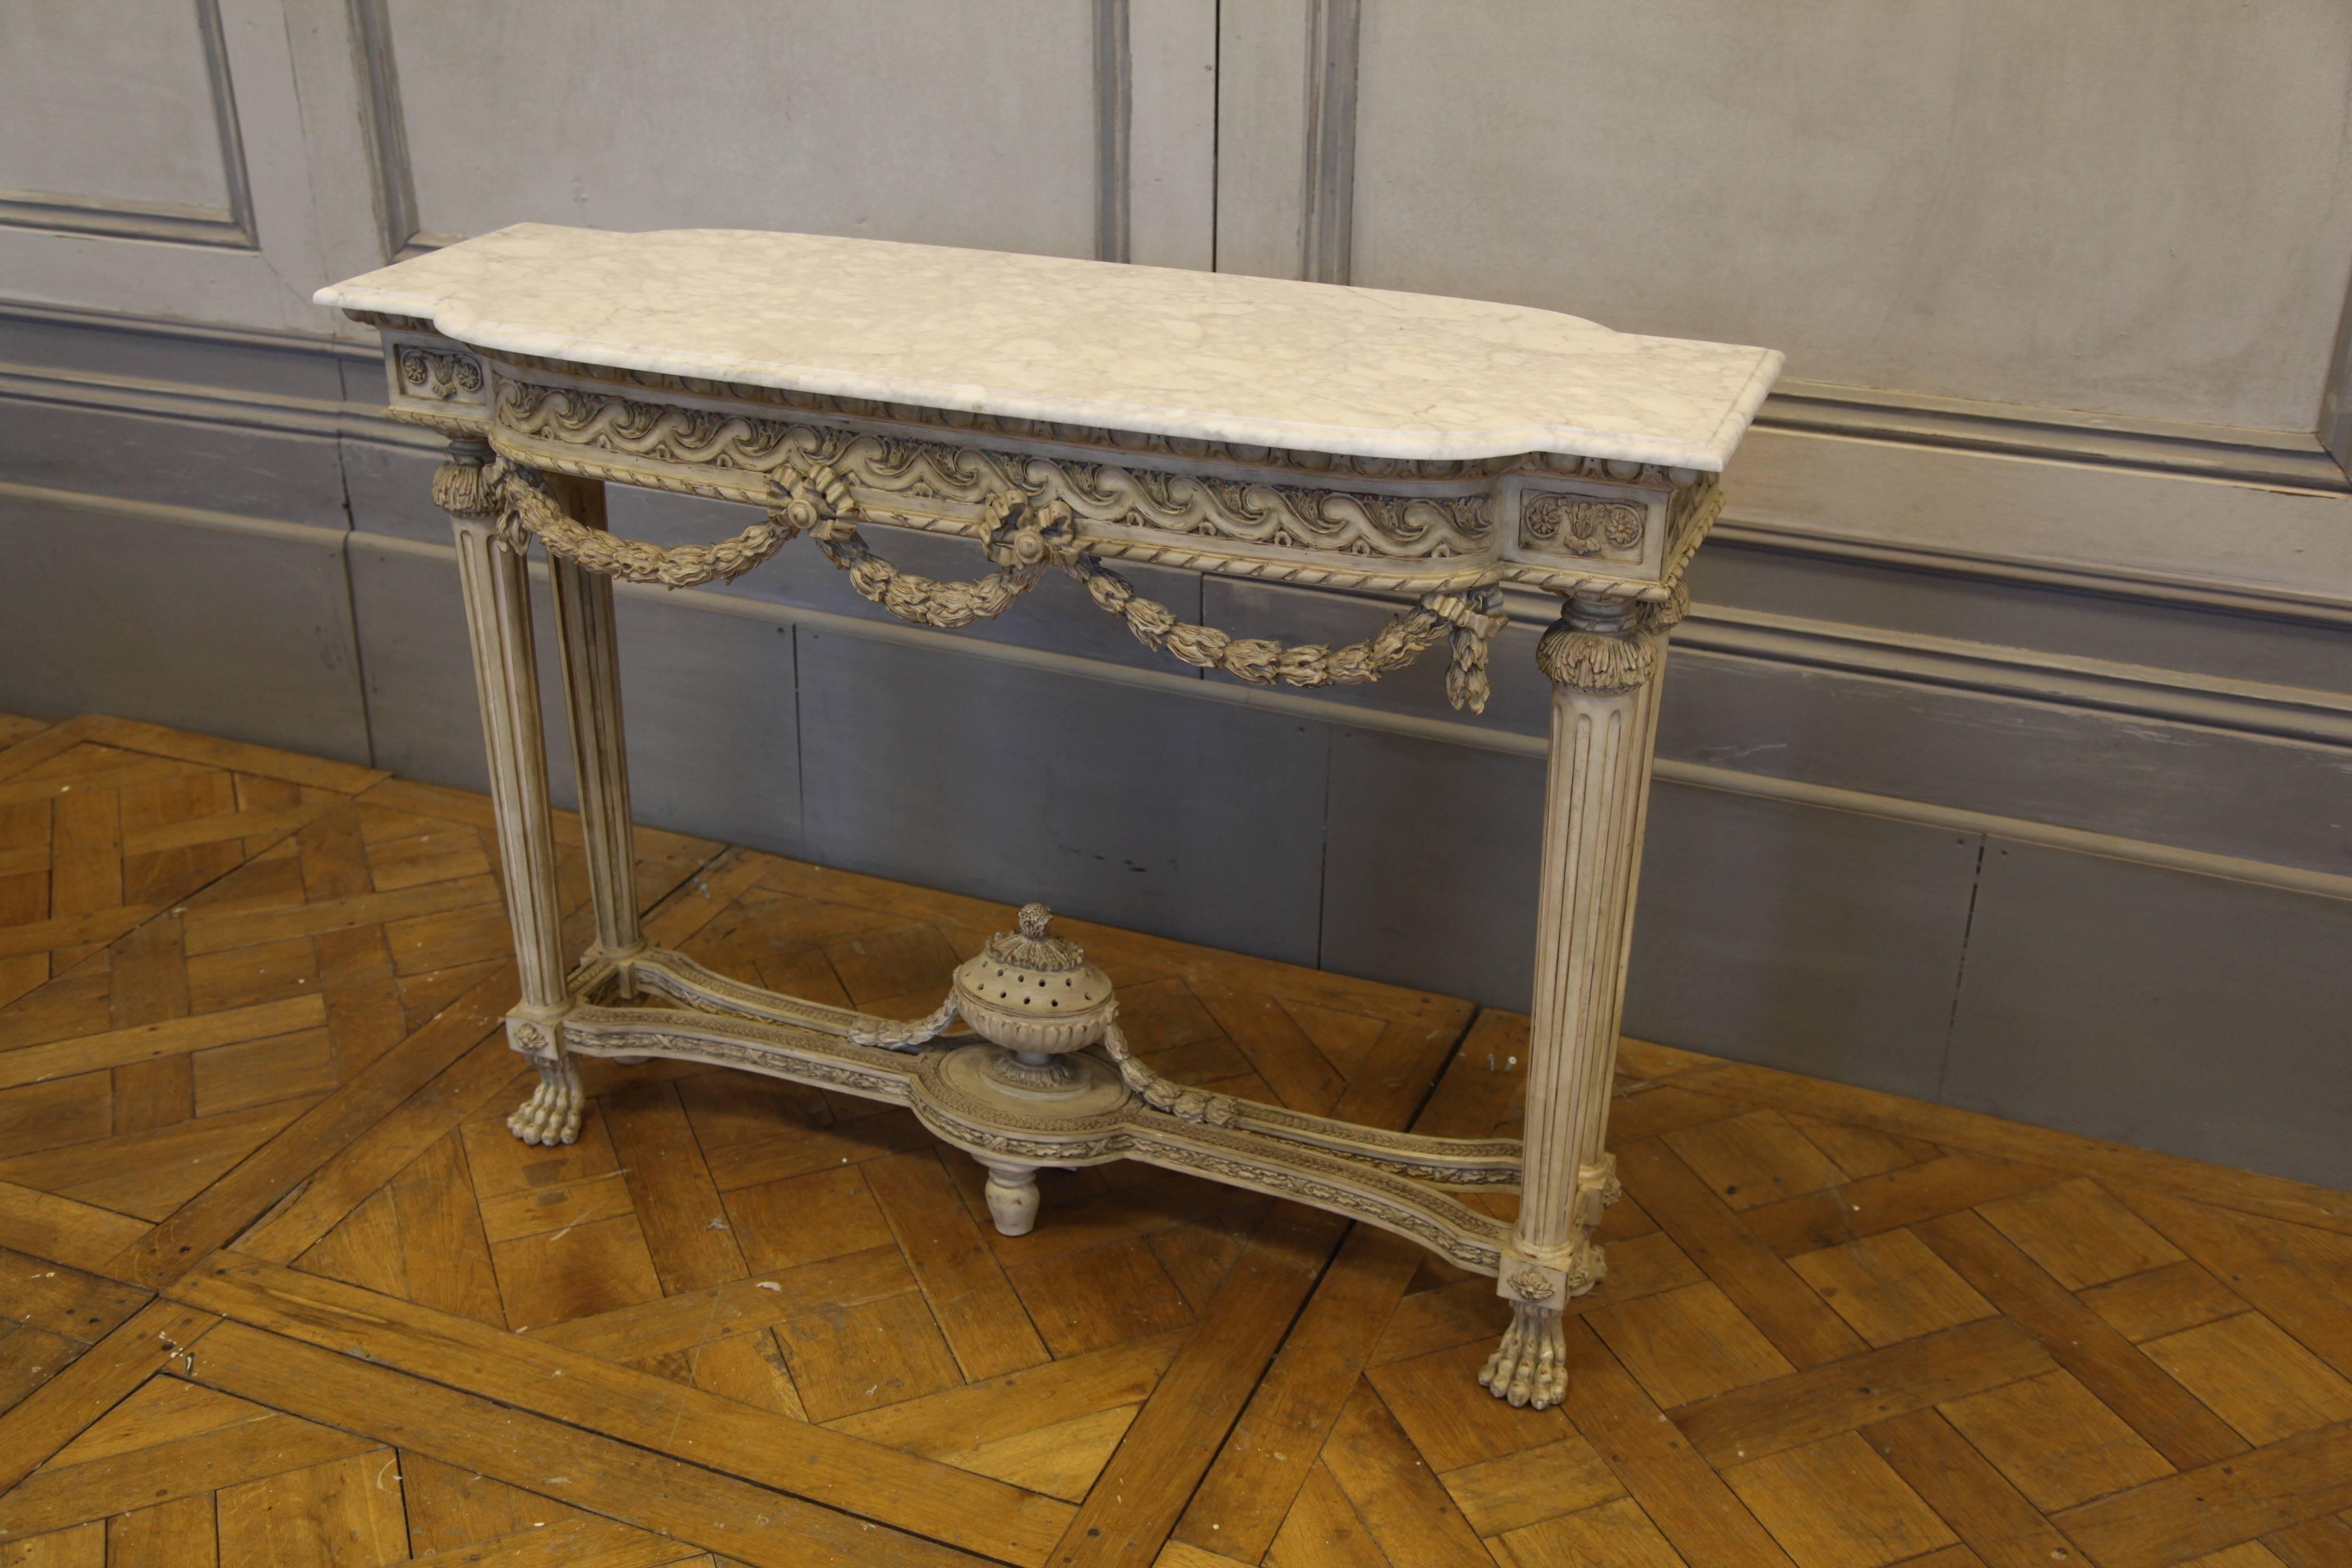 Louis XVI style freestanding console: Hand-carved on both sides by master craftsmen and hand finished in an aged, ecru white patina, made using traditional methods and materials. Beveled Carrara marble top as seen in pic.